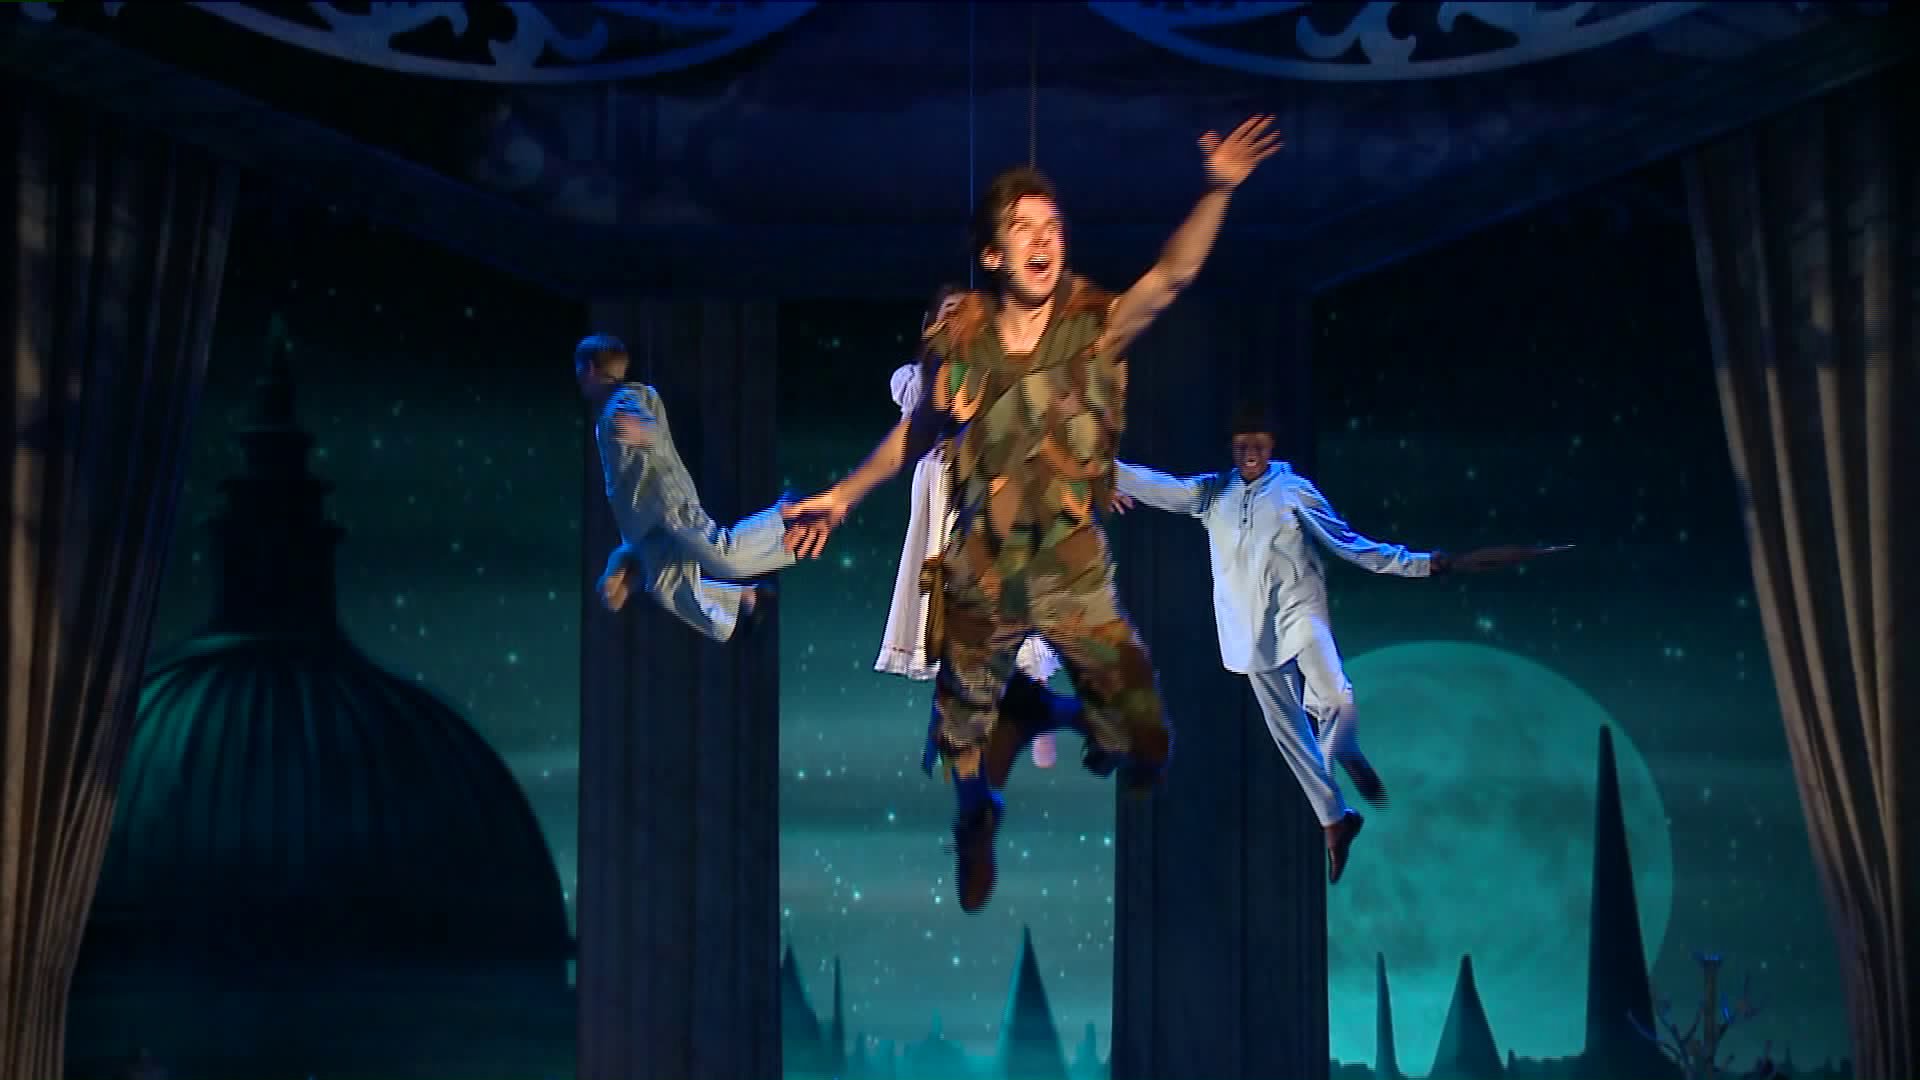 Around Town checks out Peter Pan – A Musical Adventure